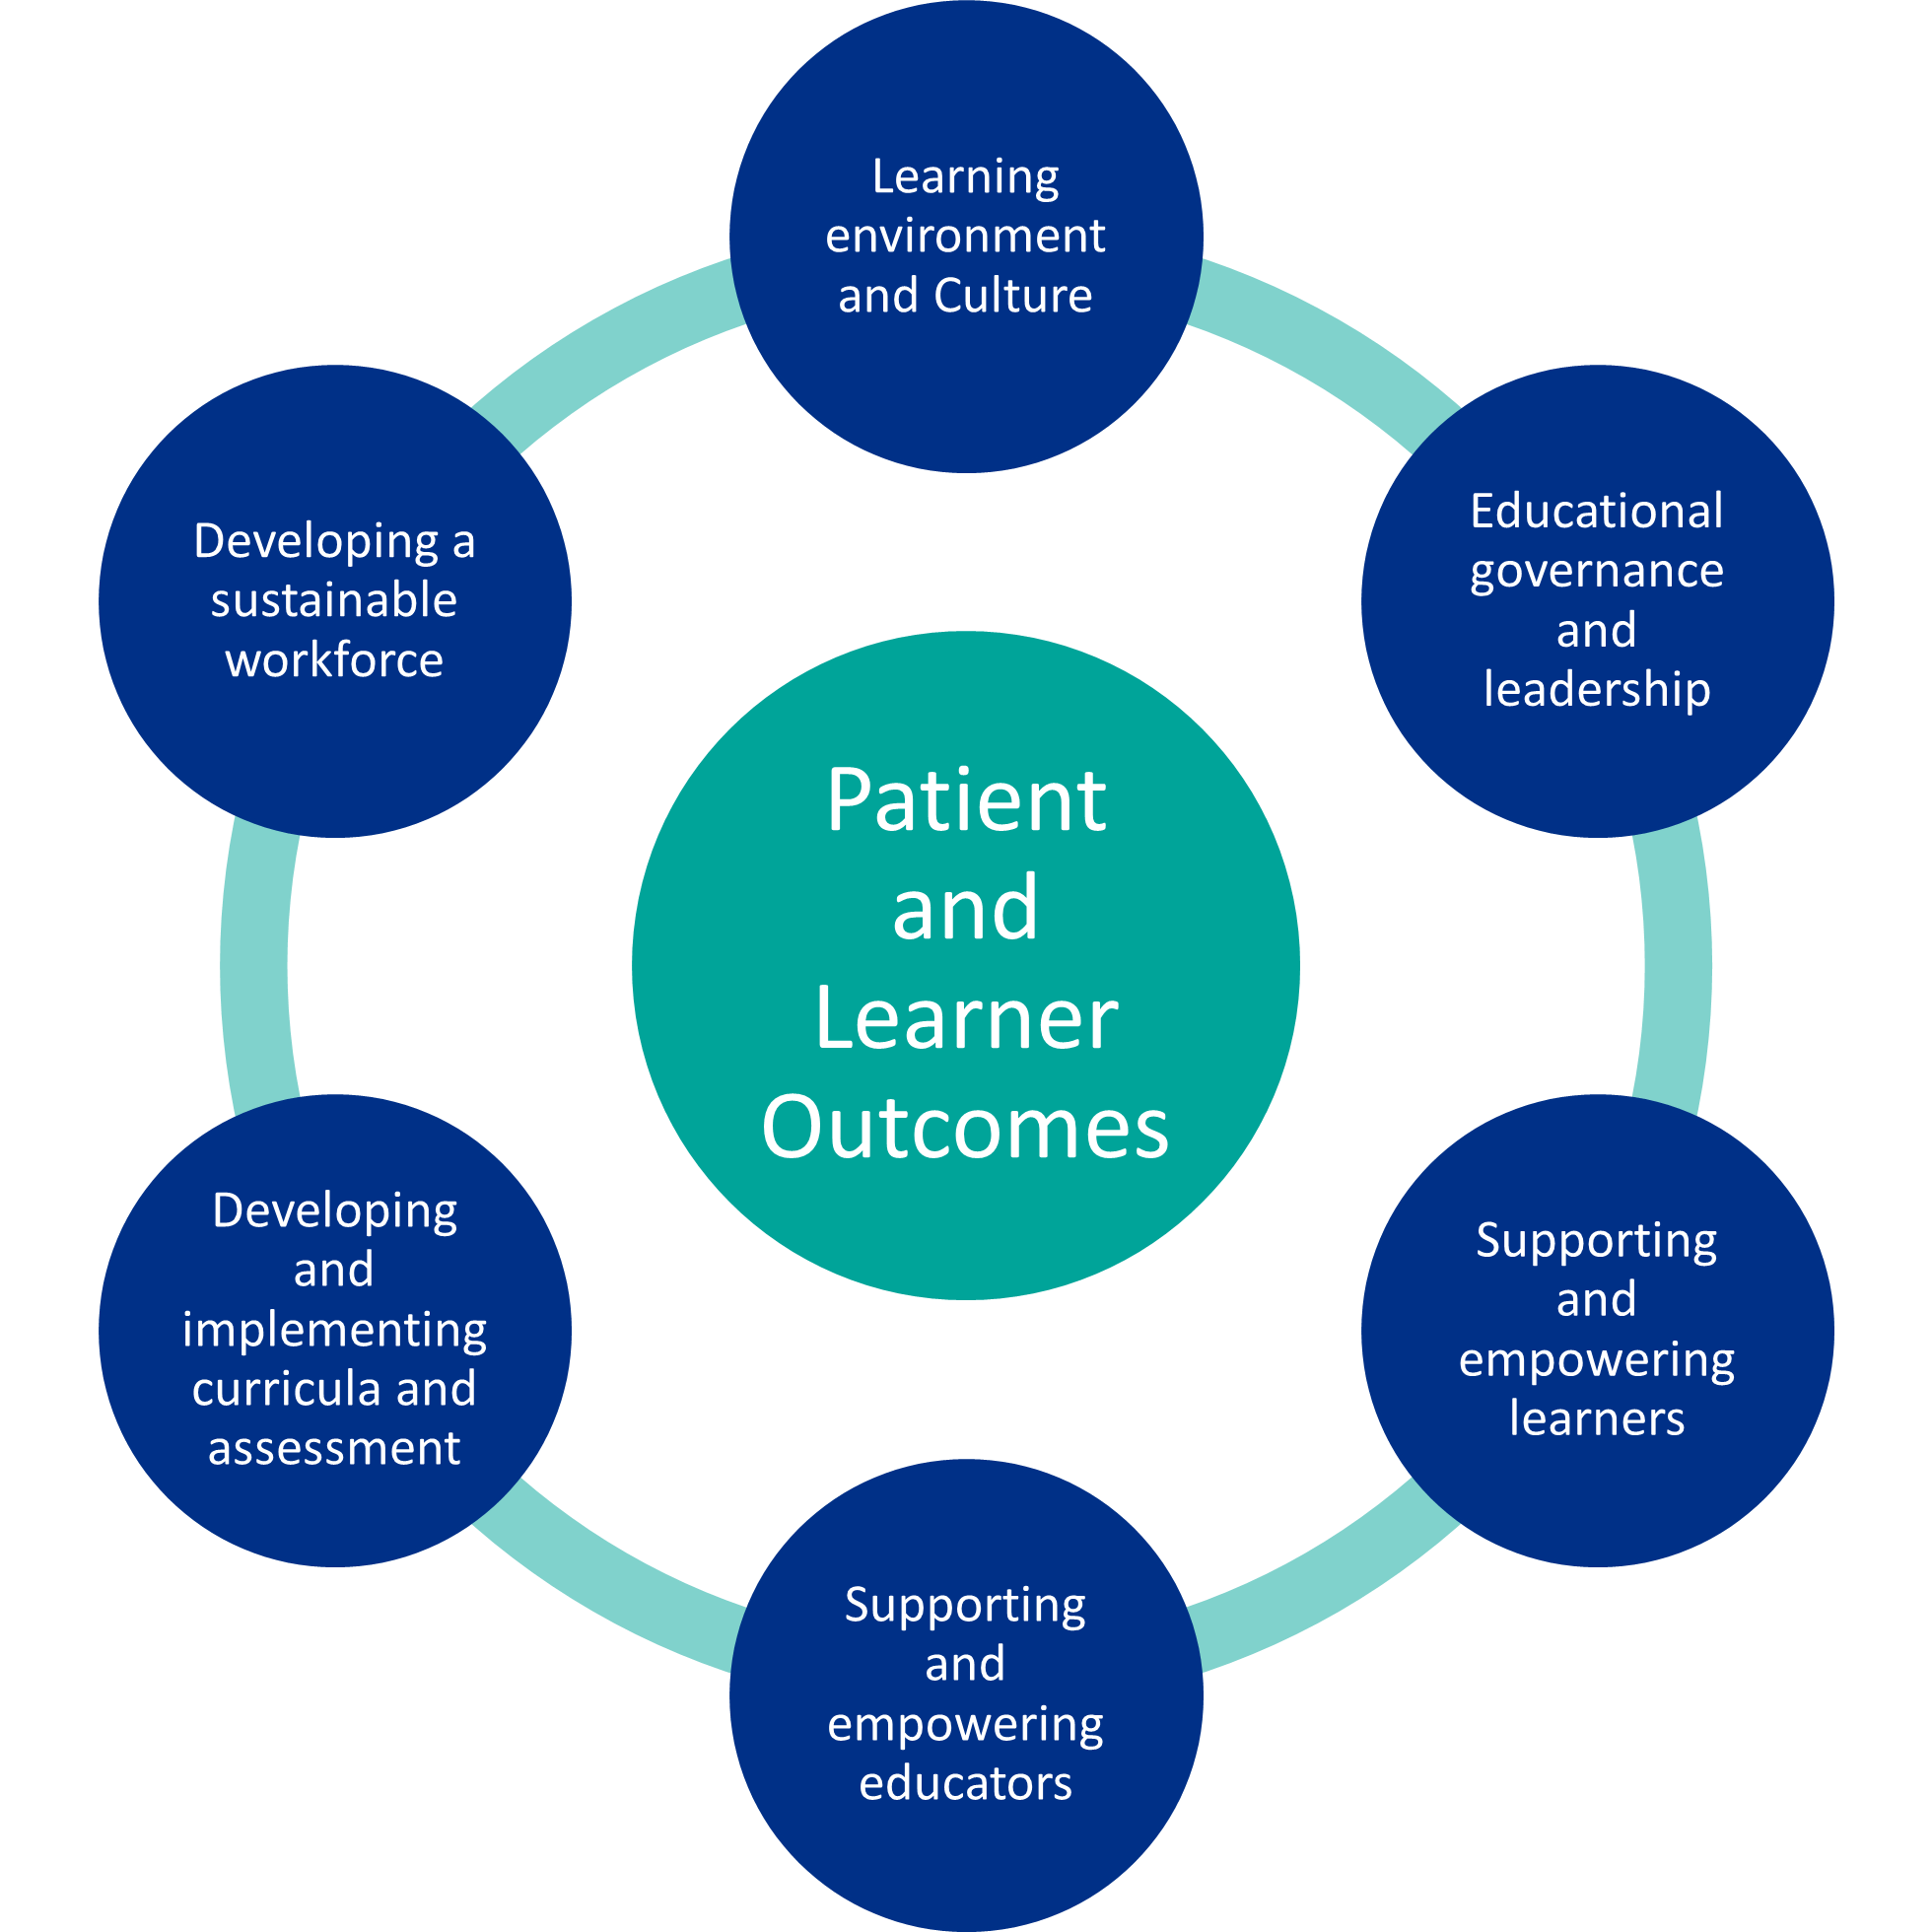 Patient and Learner Outcomes
	Learning environment and Culture
	Educational governance and leadership
	Supporting and empowering learners
	Supporting and empowering educators
	Developing and implementing curricula and assessment
	Developing a sustainable workforce
